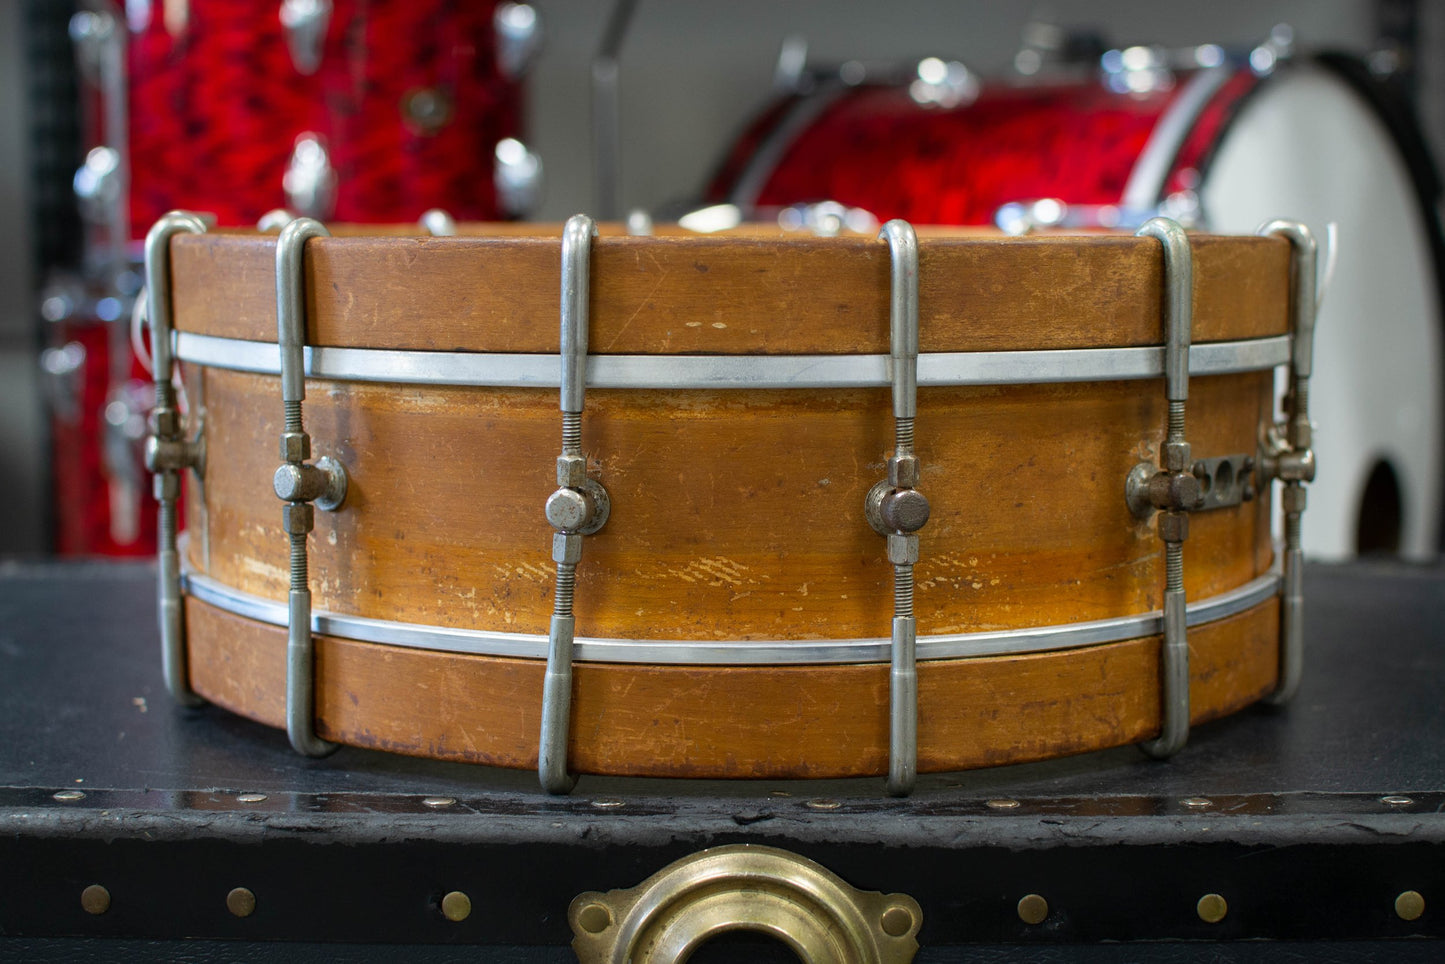 1910s 1920s Walberg and Auge 4.5x14 Snare Drum